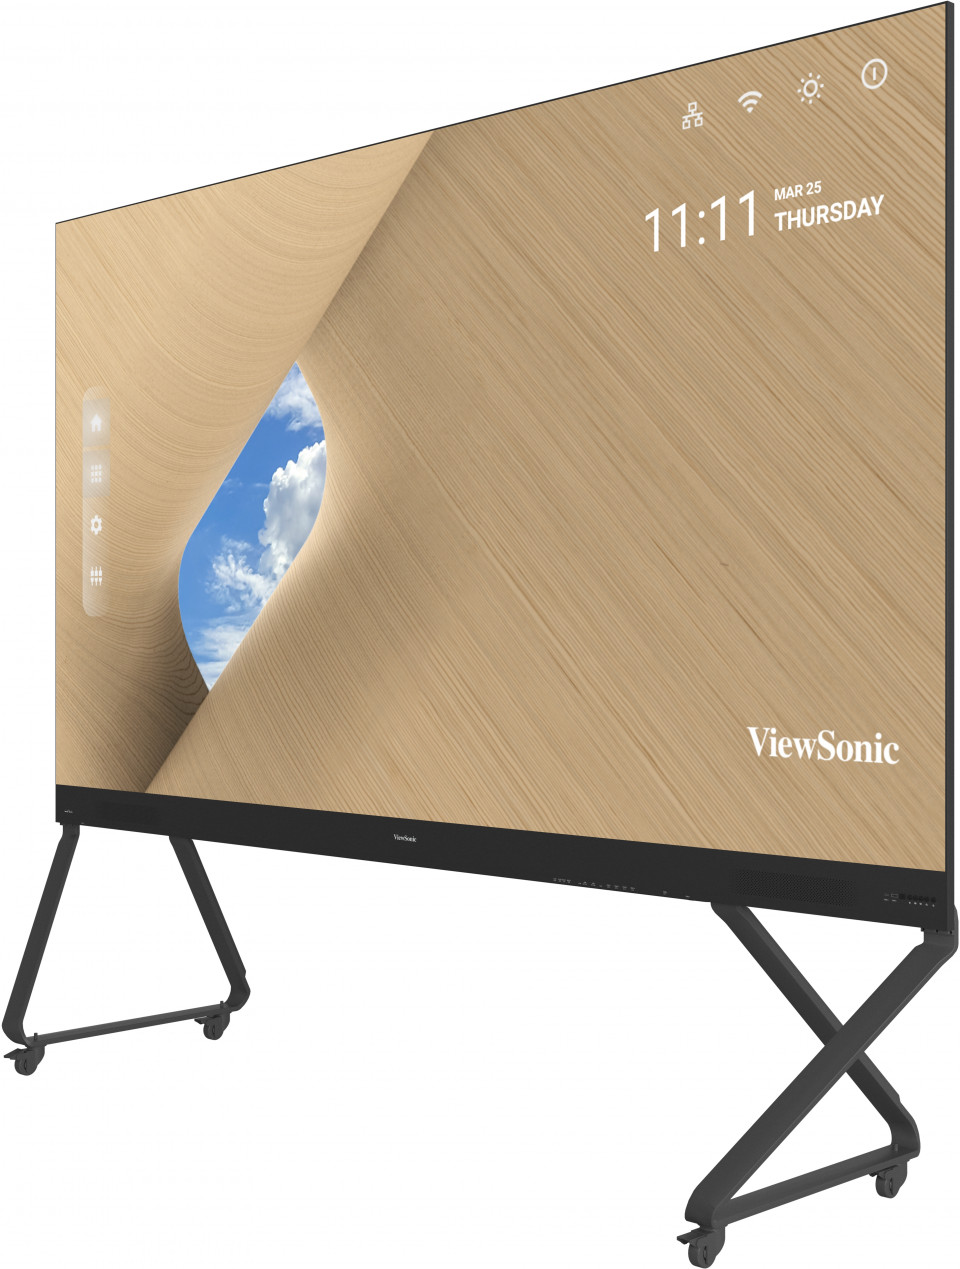 ViewSonic LDP108-121 All-in-One Direct View LED-Display - 108 Zoll - 1.25mm PP - 500 cd/m² - 1920x1080 Pixel - LED-Display